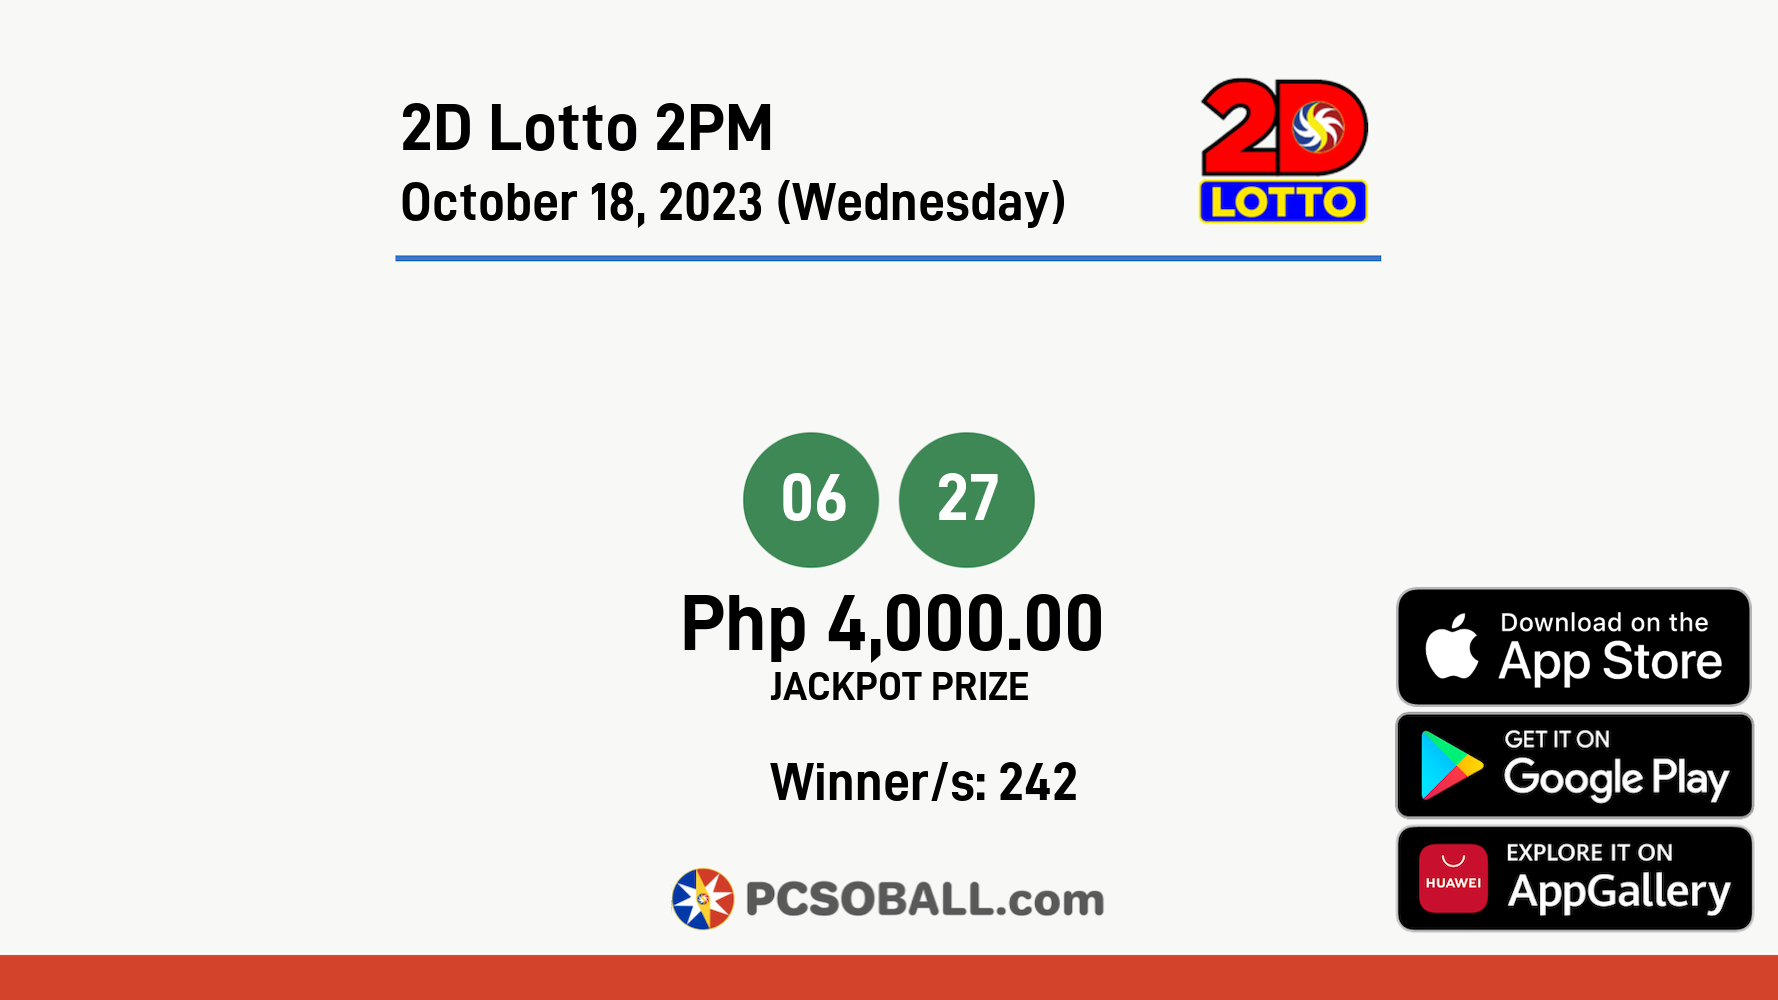 2D Lotto 2PM October 18, 2023 (Wednesday) Result